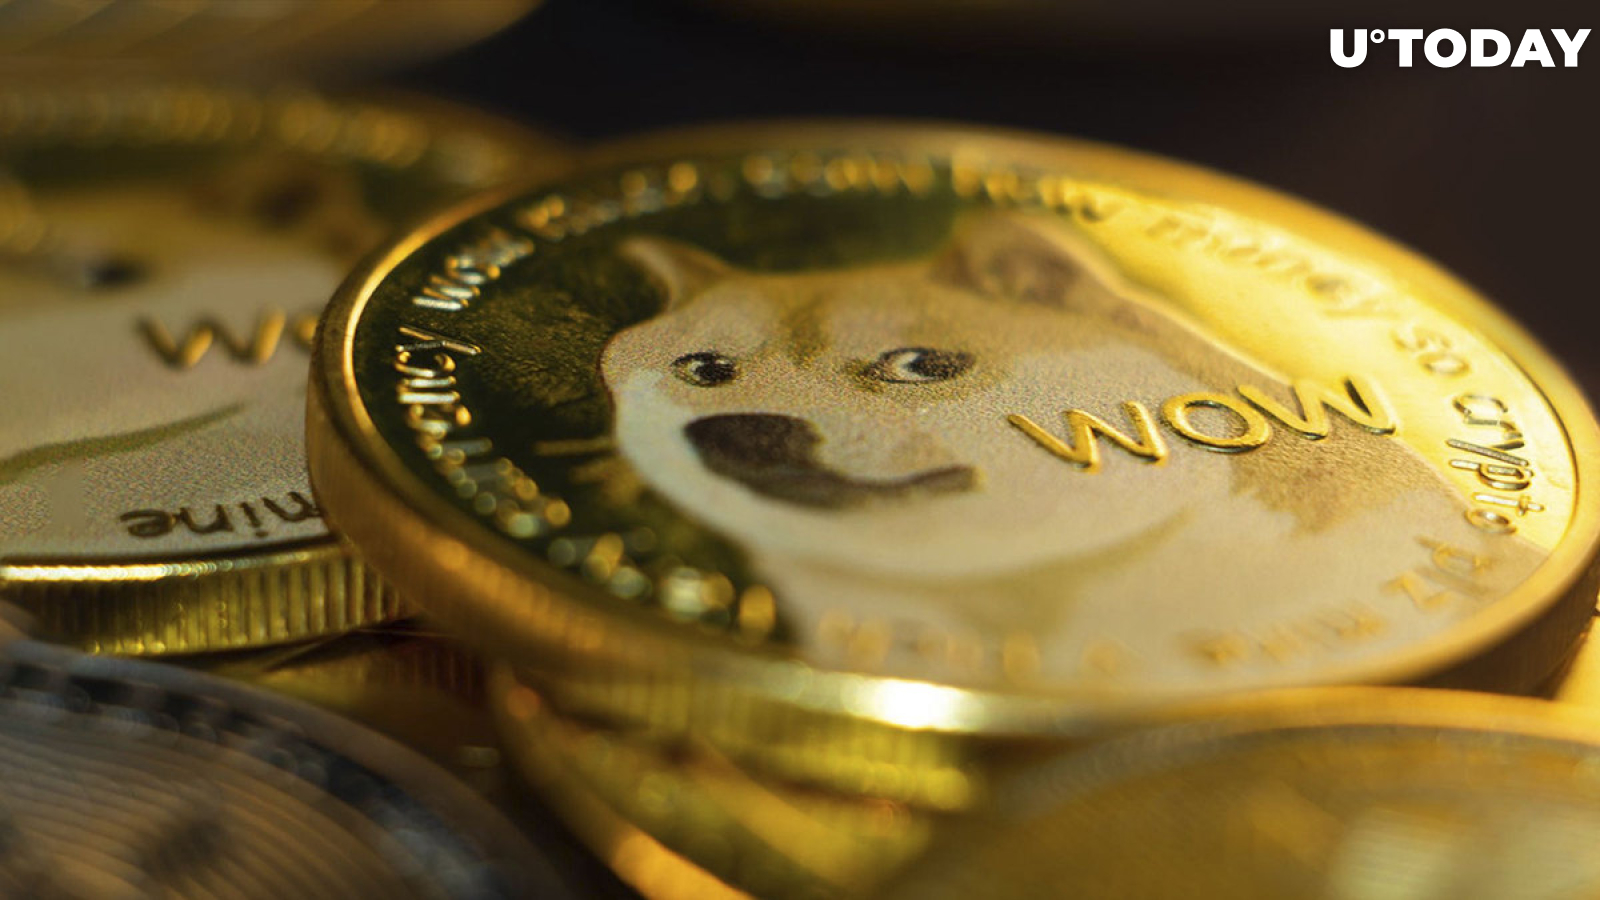 Dogecoin (DOGE) Spiked 160% Last Time This Happened, Will History Repeat Itself?